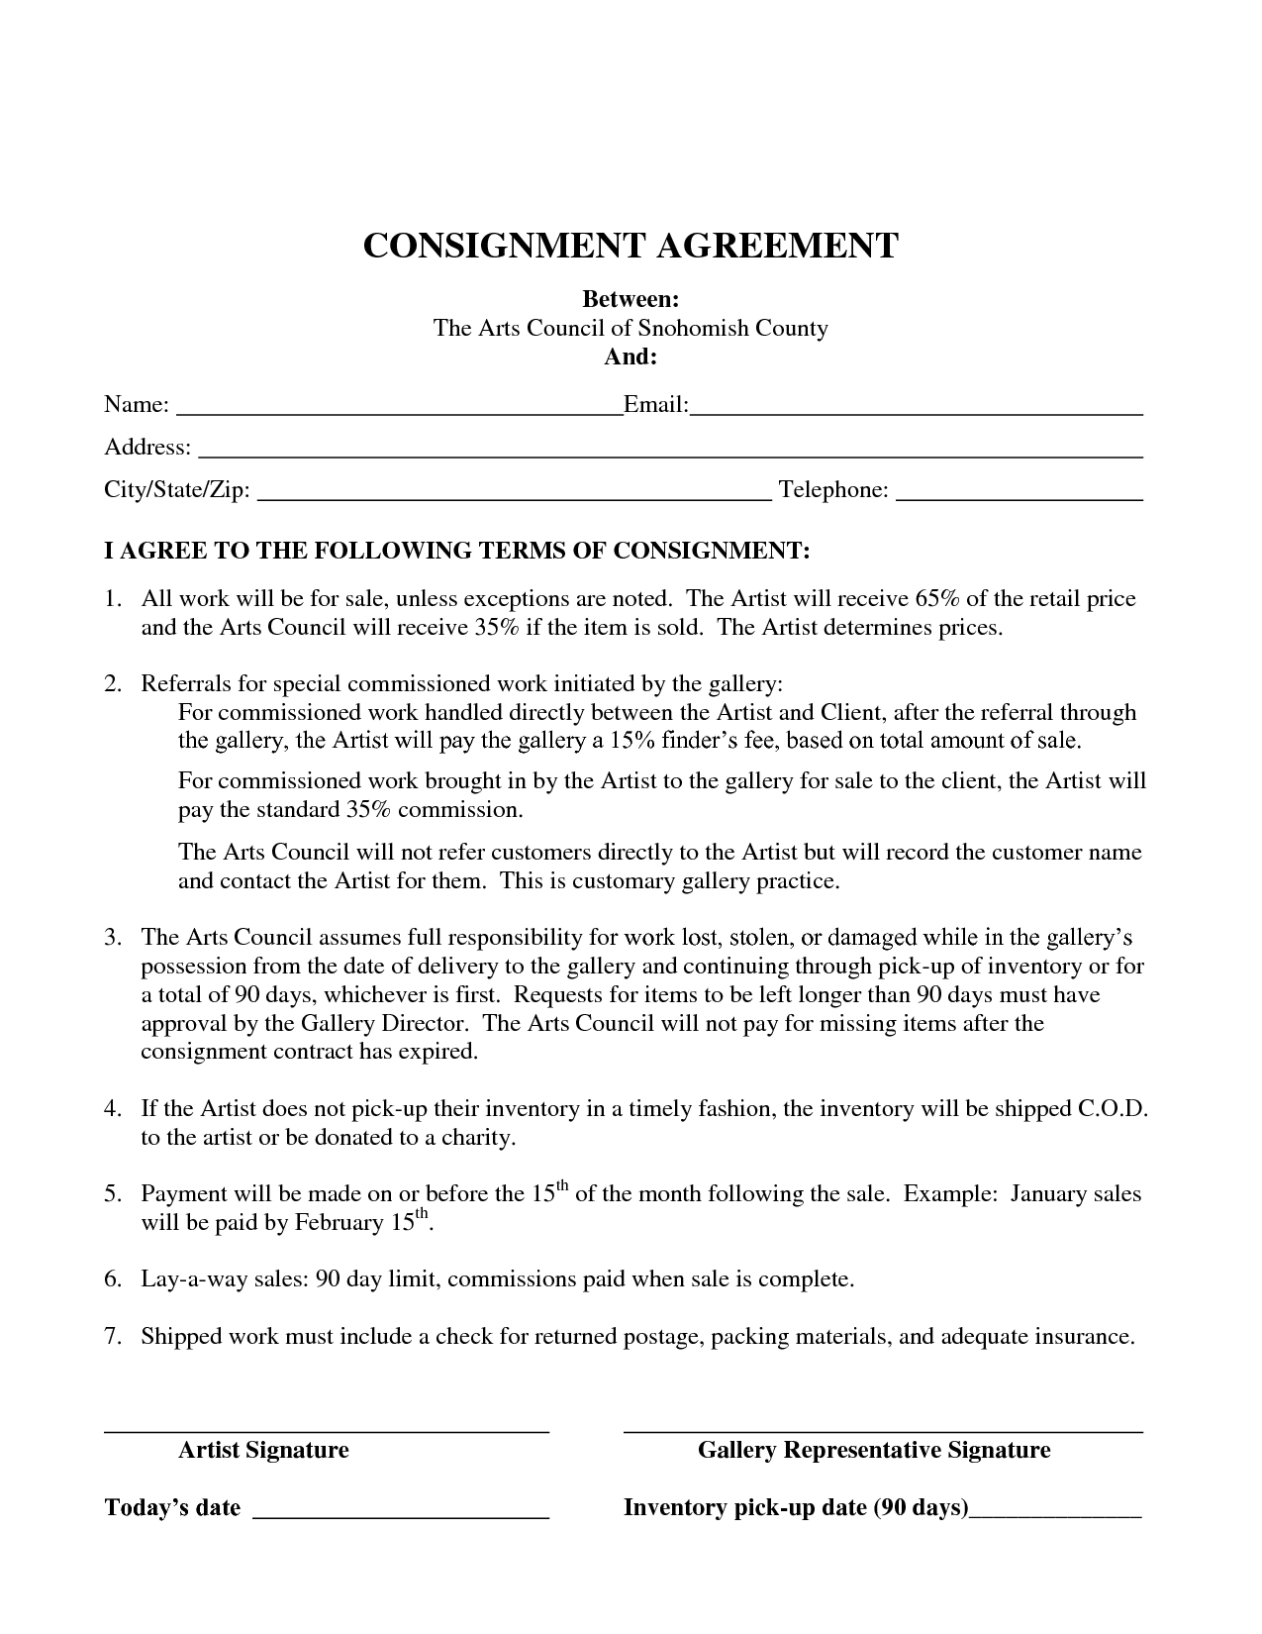 Consignment Agreement Template - Free Printable Documents for Simple Consignment Agreement Template